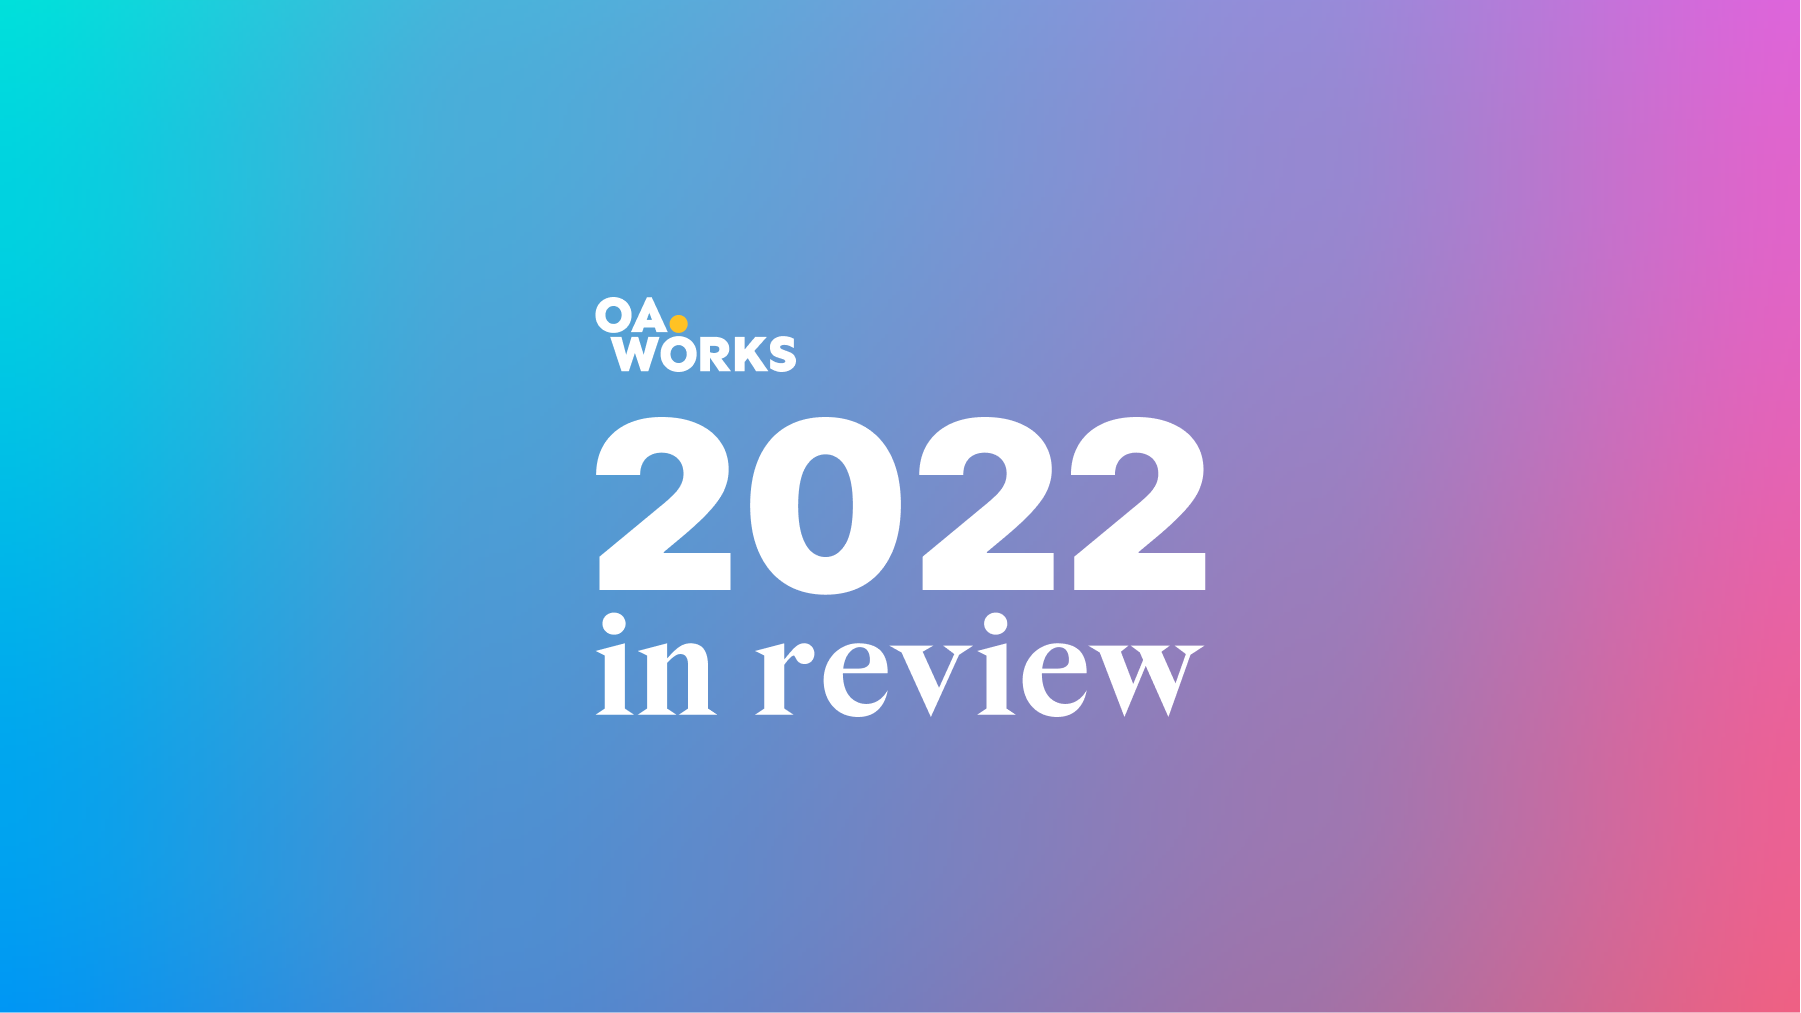 The text ”2022 year in review” is imposed on a multi-colored background.